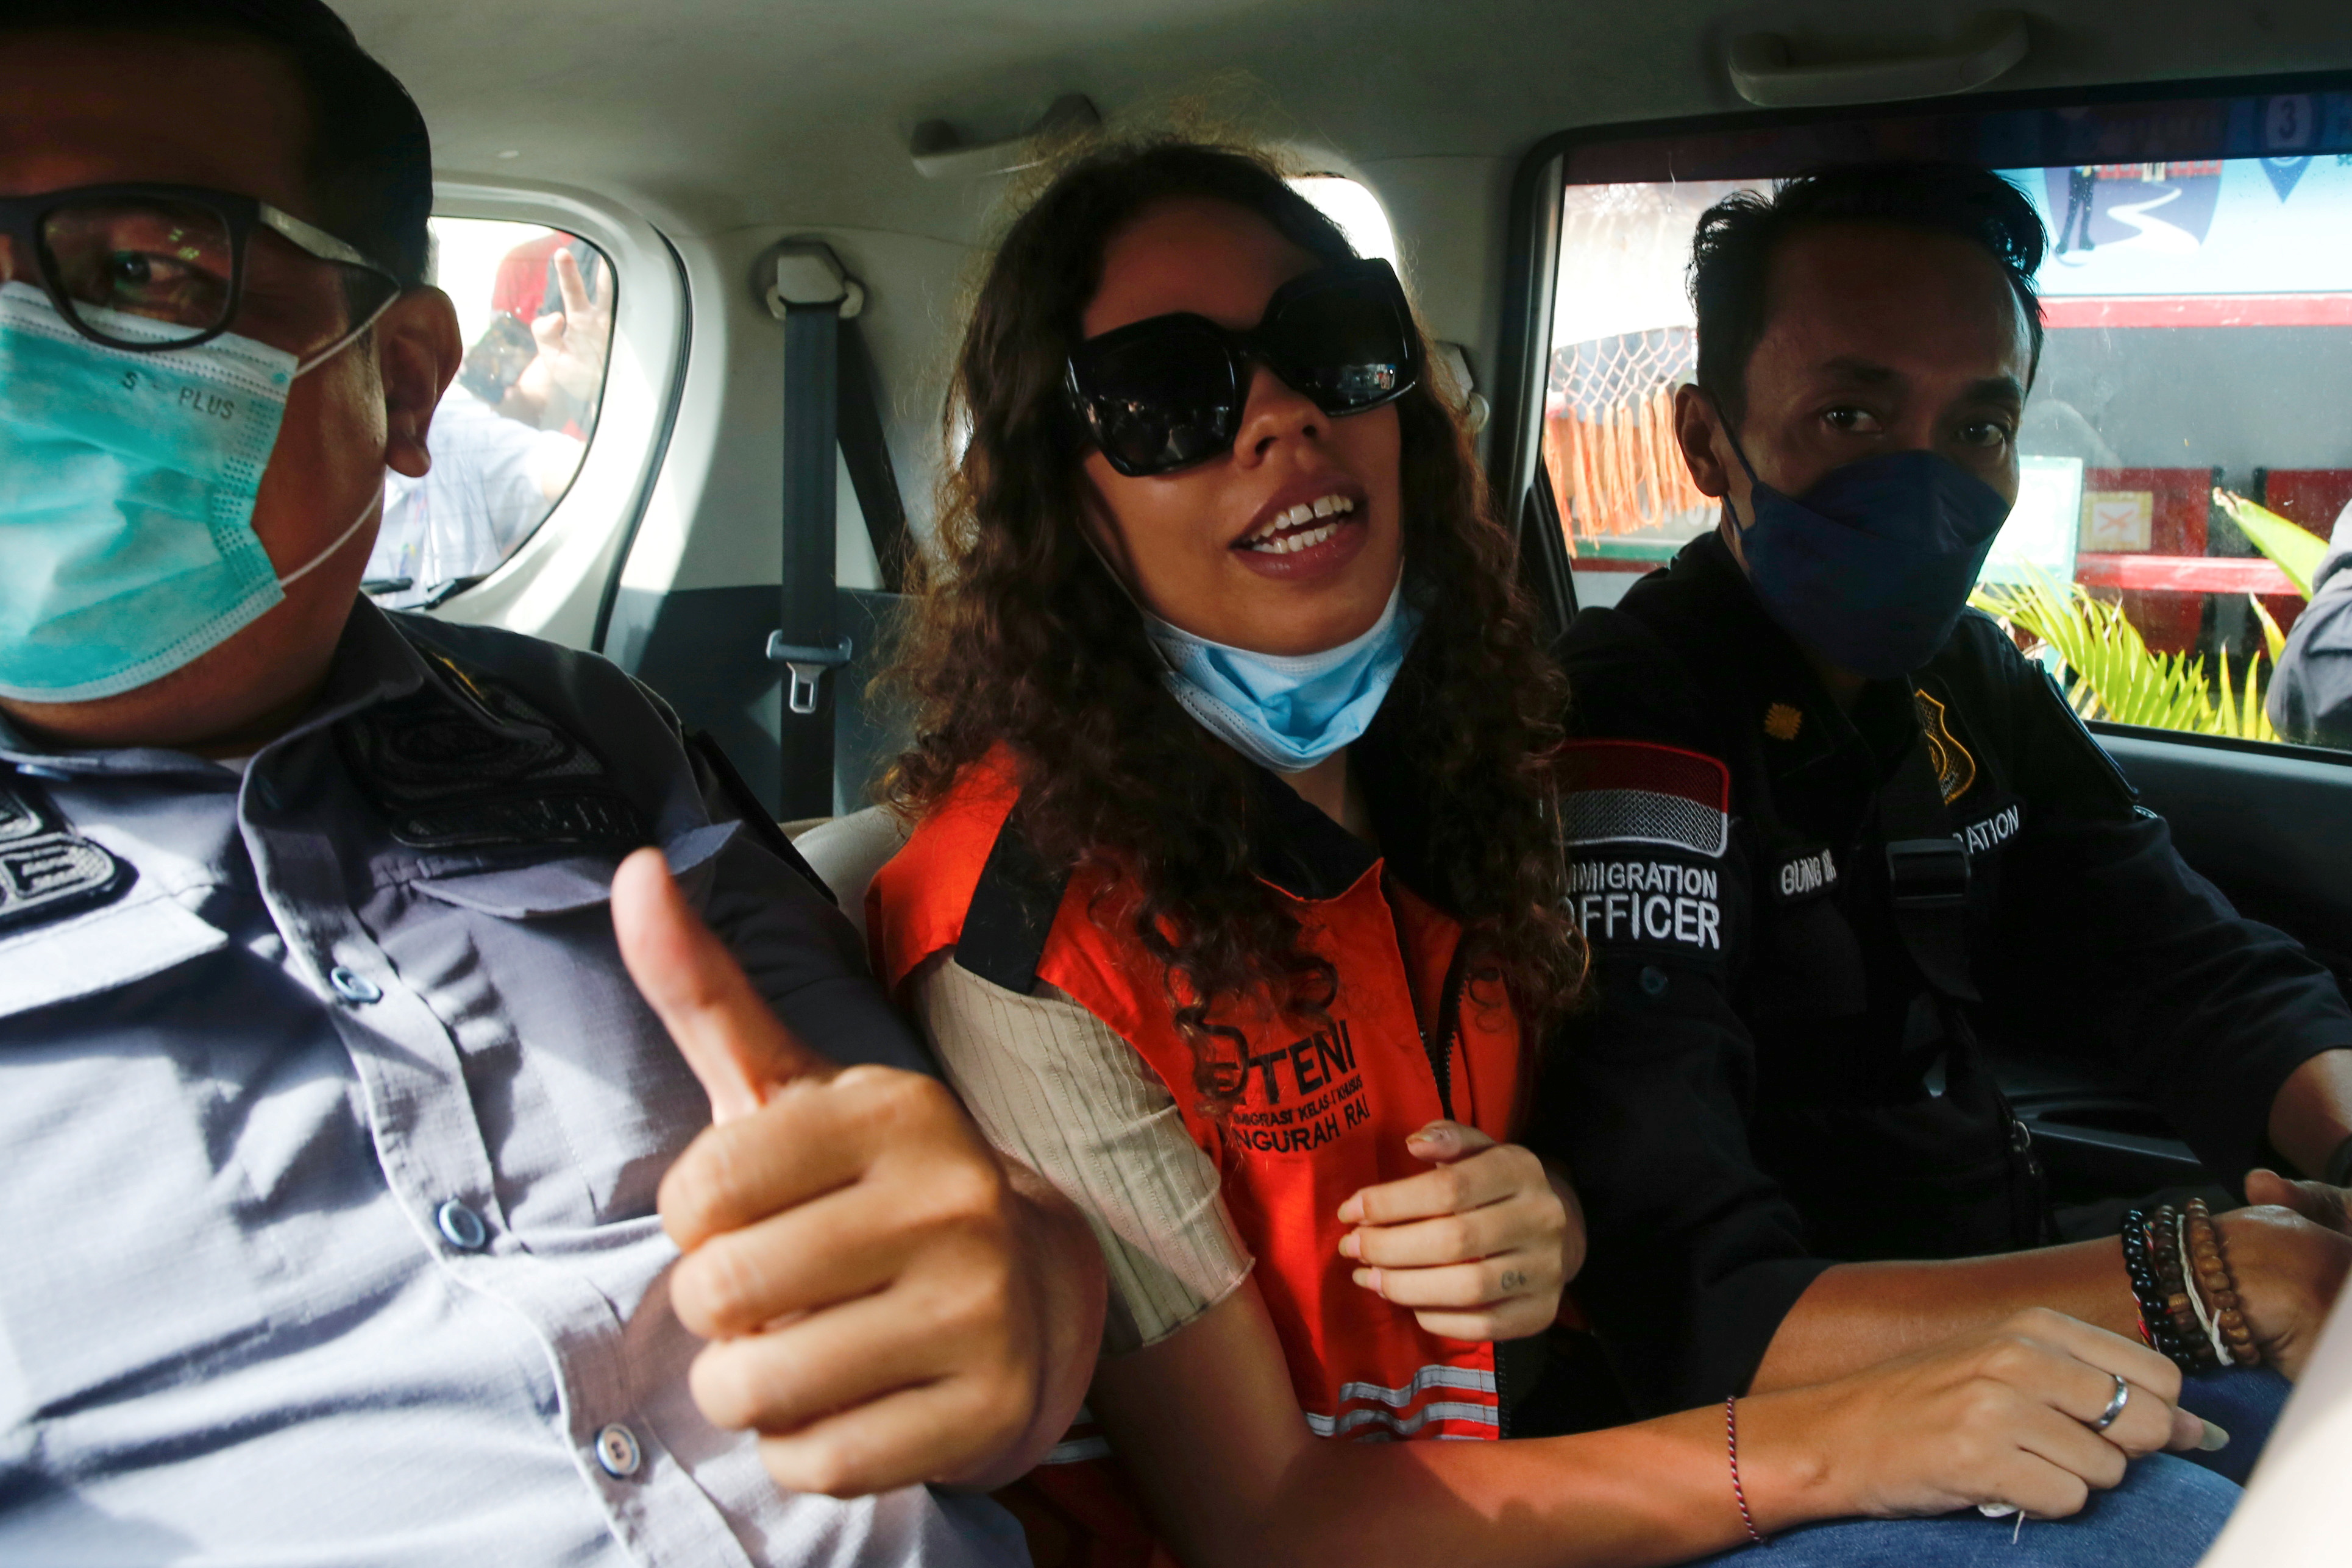 Heather Mack, an American woman jailed in 2015 with her boyfriend after being found guilty for playing a role in murdering her mother and stuffing the remains in a suitcase, is seen inside an immigration car, after being released from Kerobokan Prison in Denpasar, Bali, Indonesia, October 29, 2021. REUTERS/Johannes P. Christo